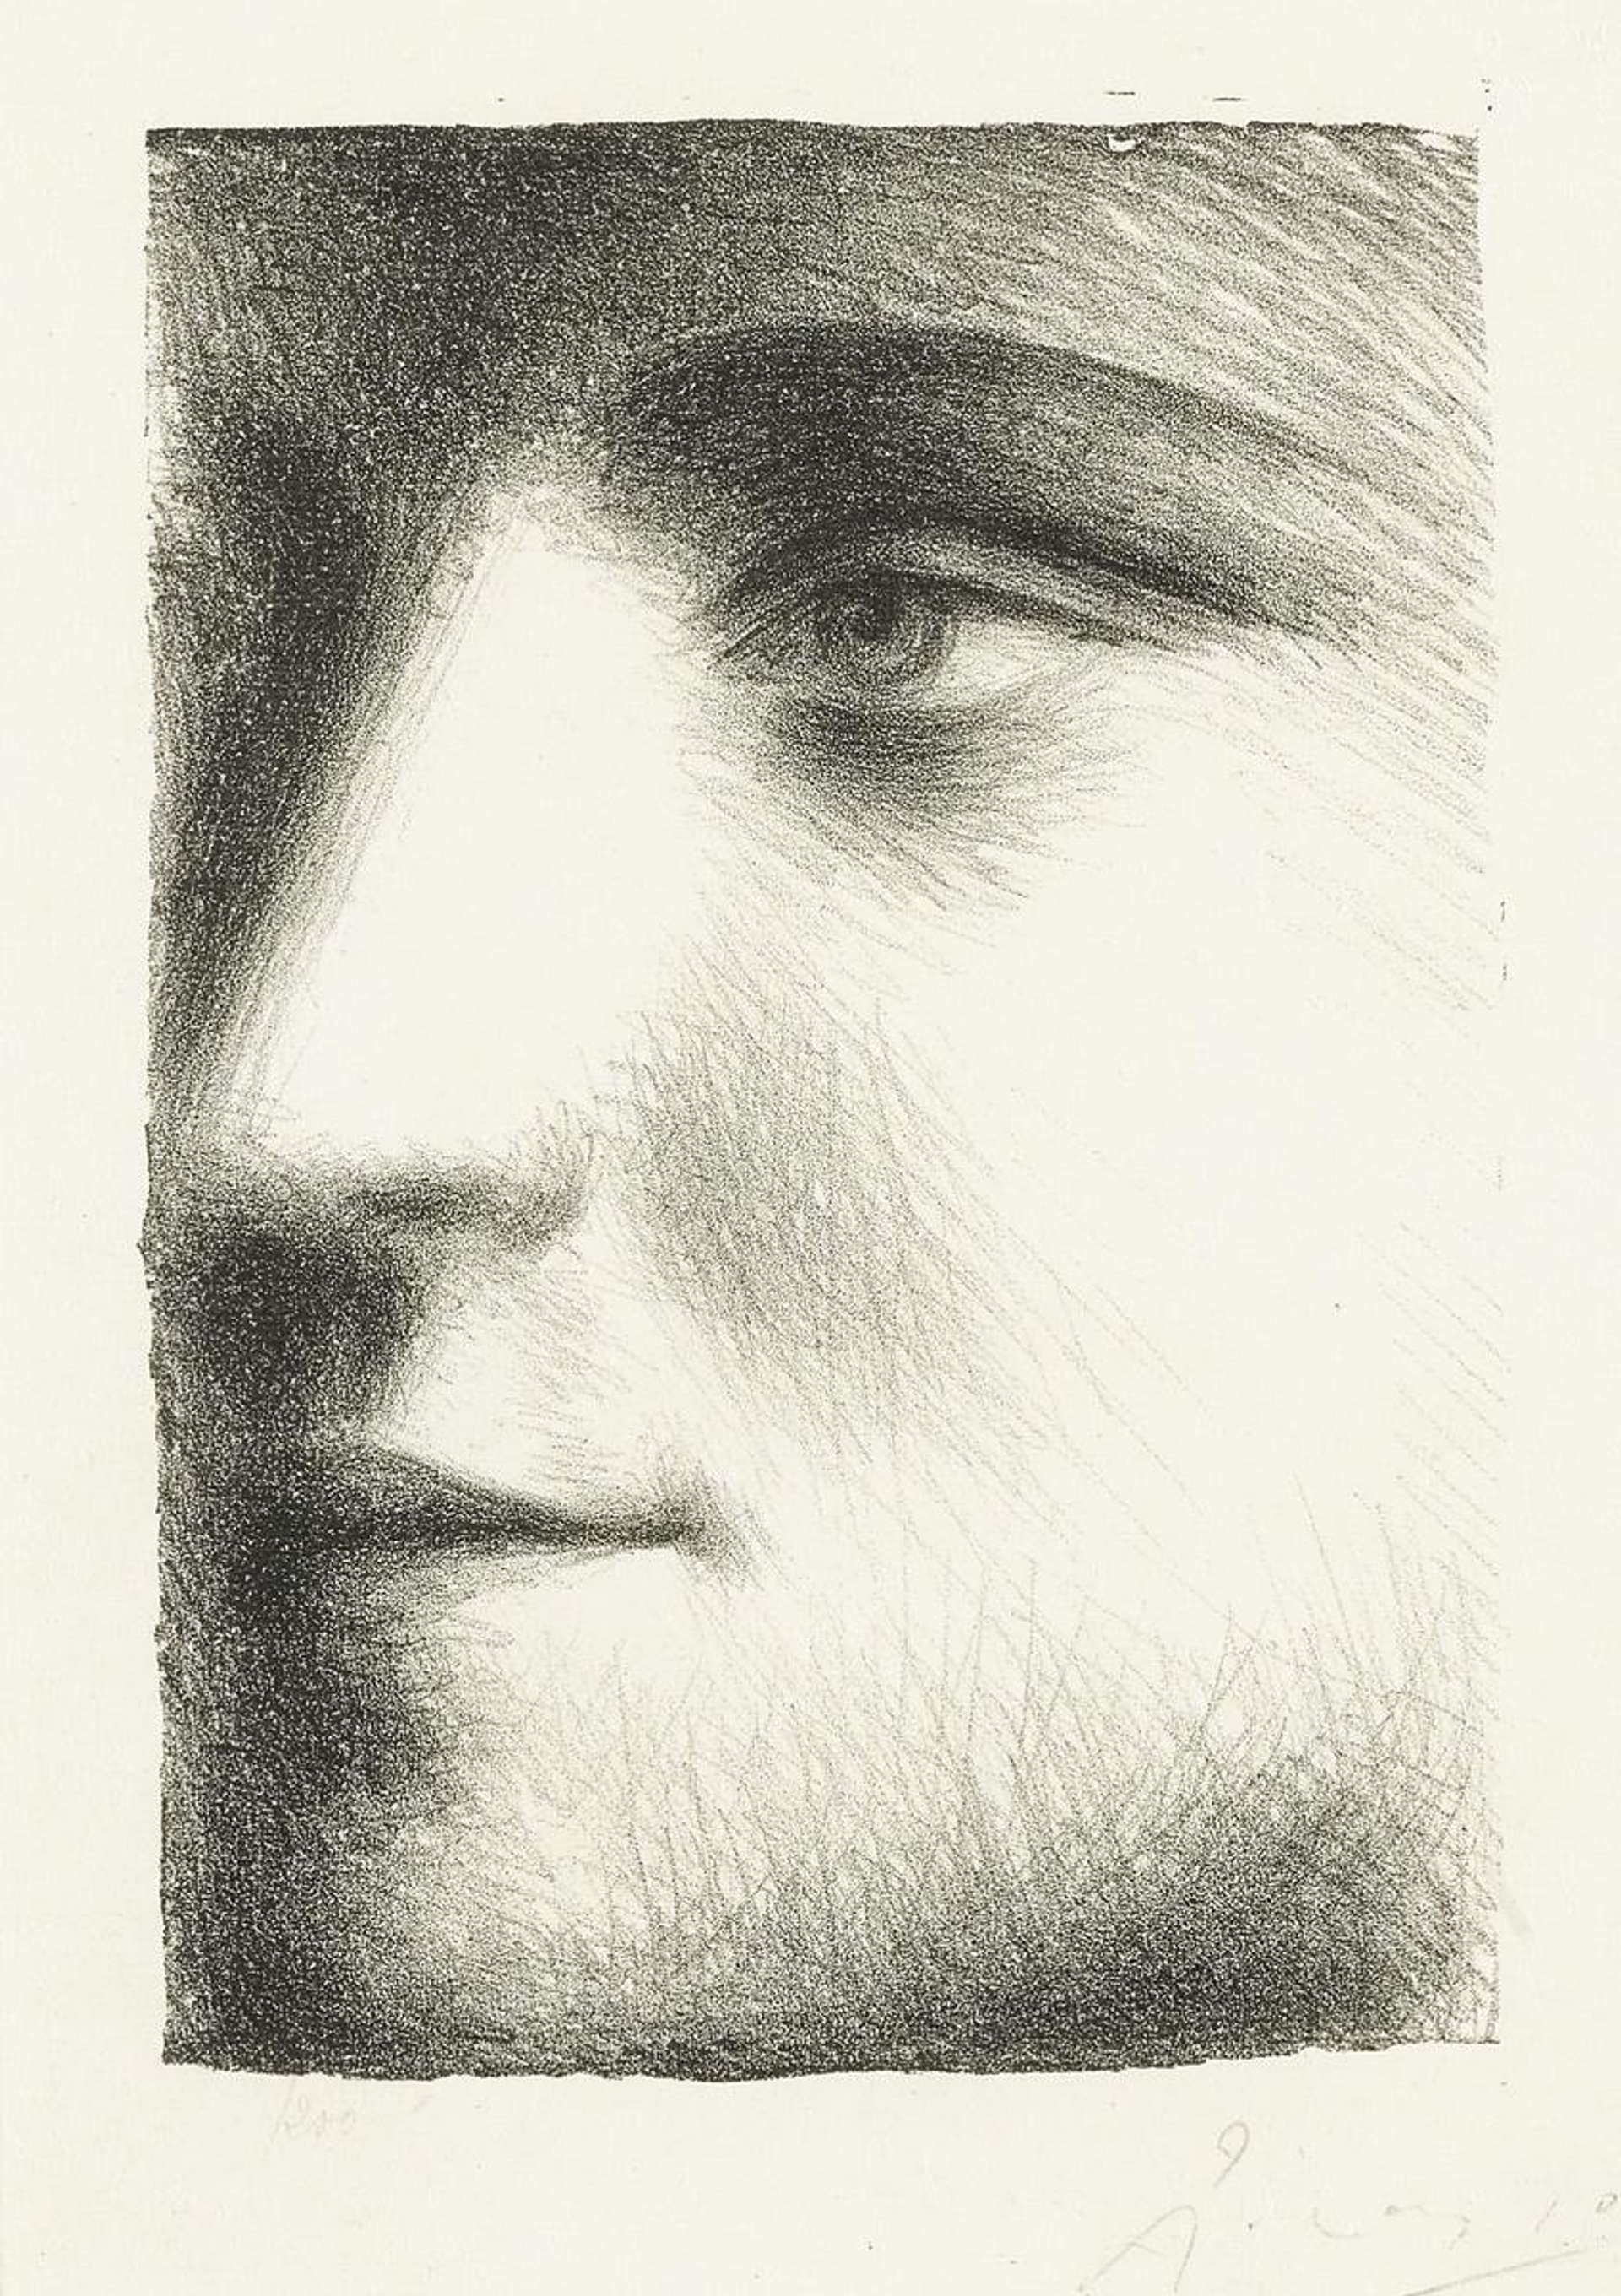 A monochrome drawing by Pablo Picasso, a close-up, partial-profile of his muse Marie Therese Walter.